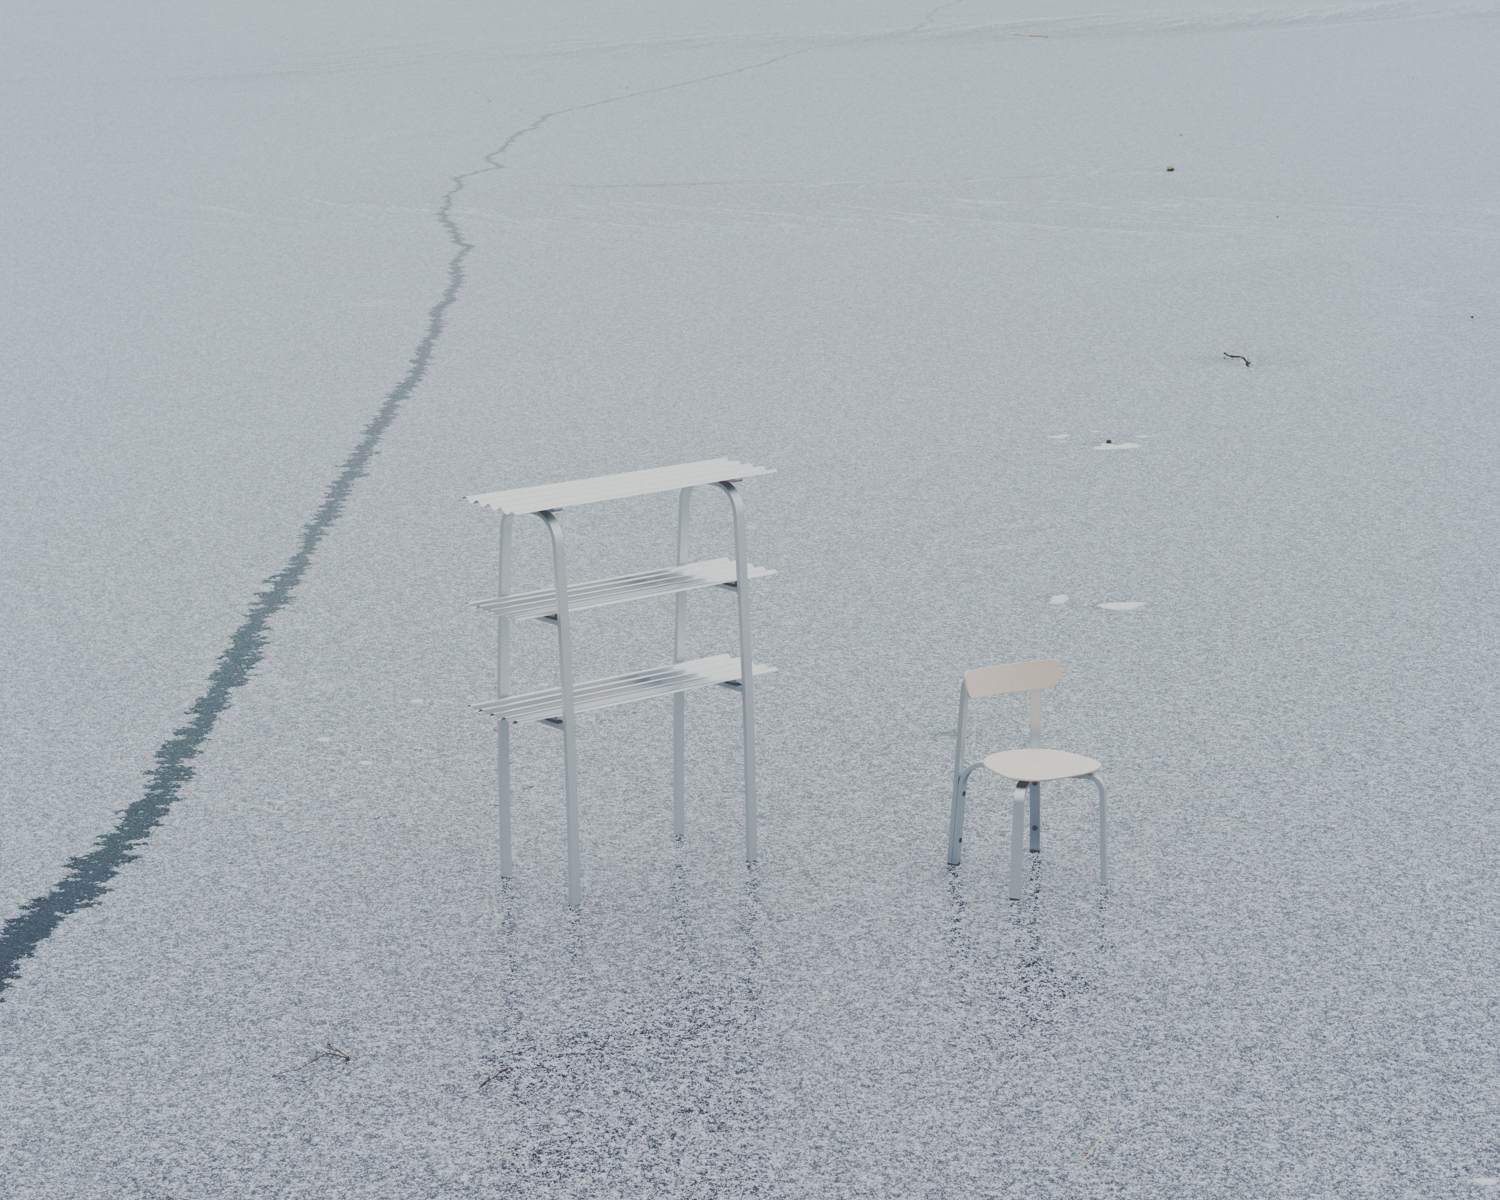 Minimalist Furniture Collection "No.7" Project by Tao & Jin